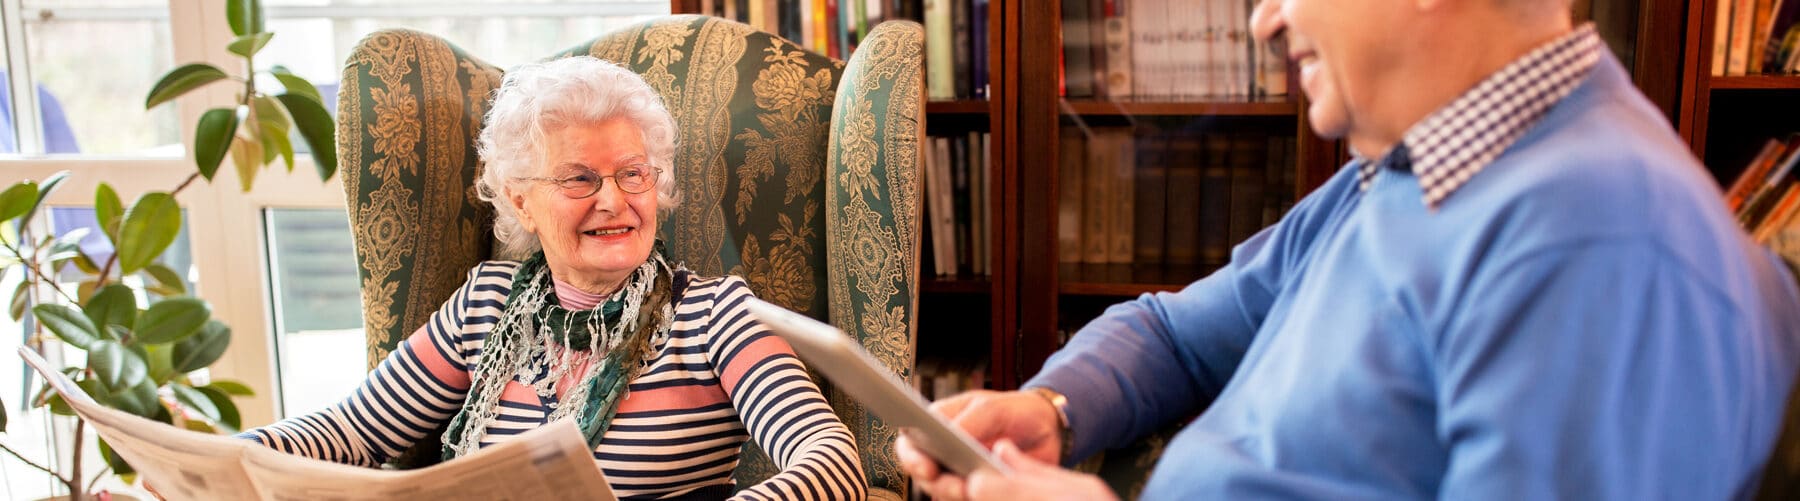 two residents smiling while reading